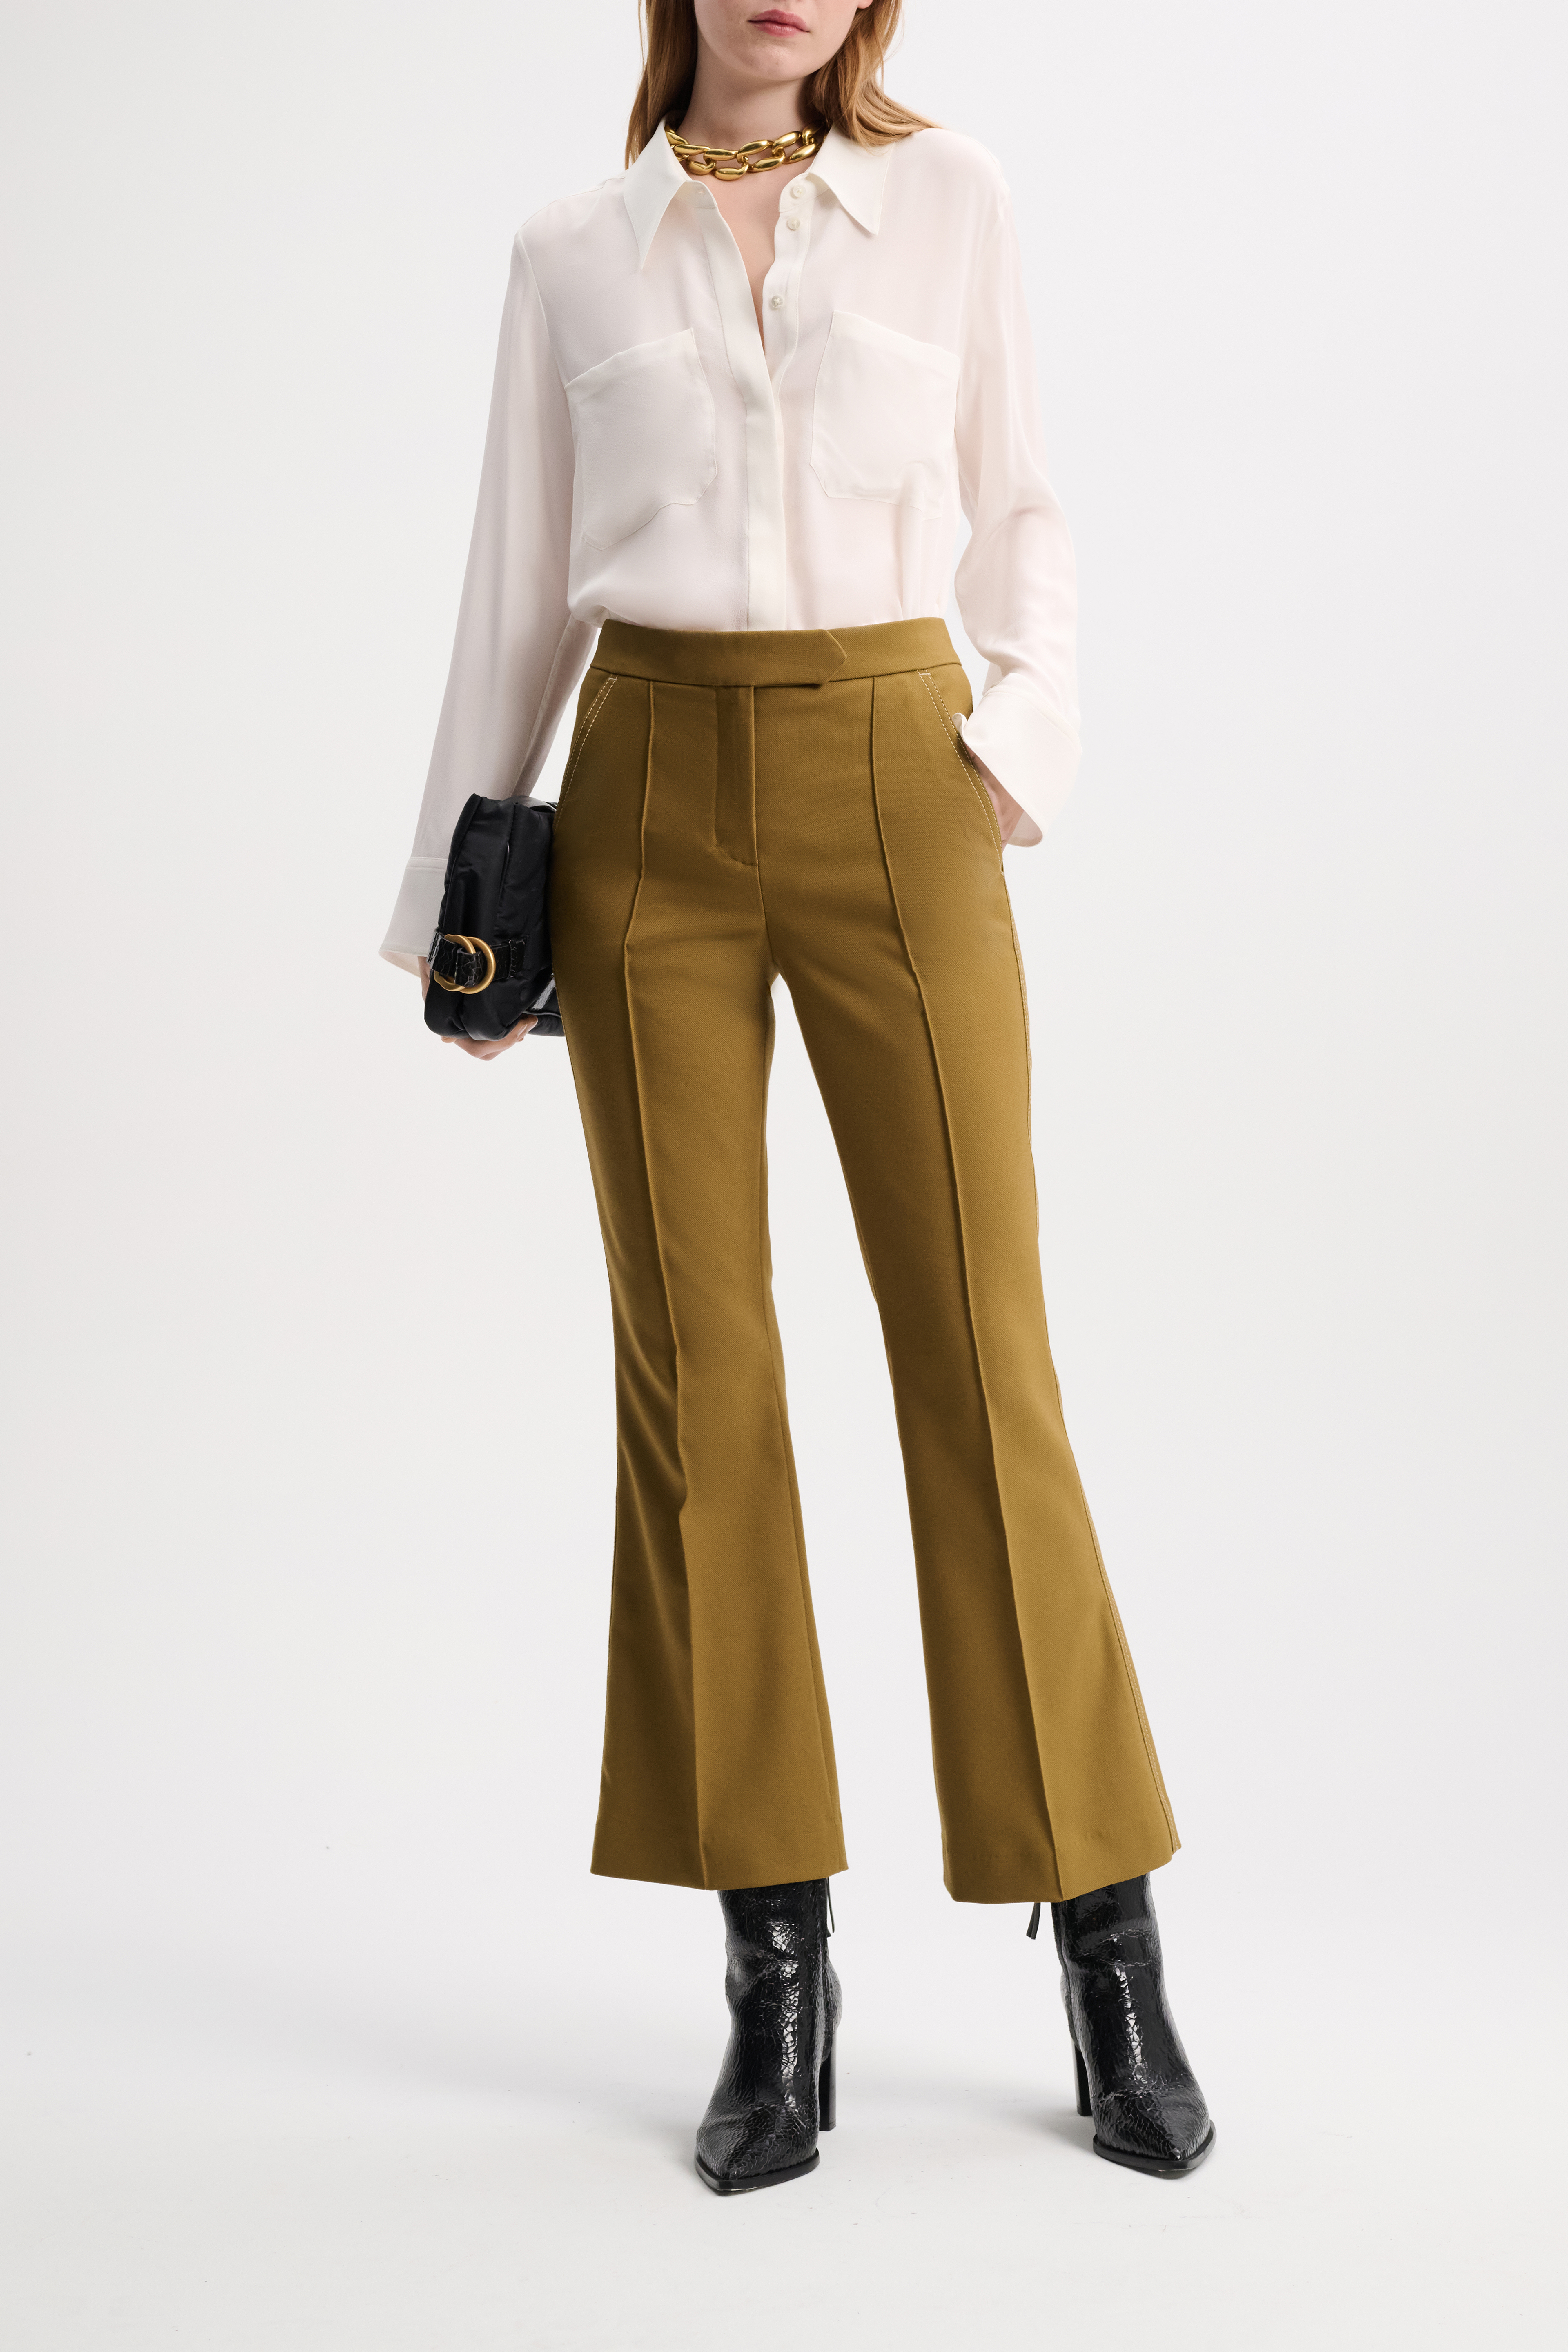 Dorothee Schumacher Cropped pants with decorative